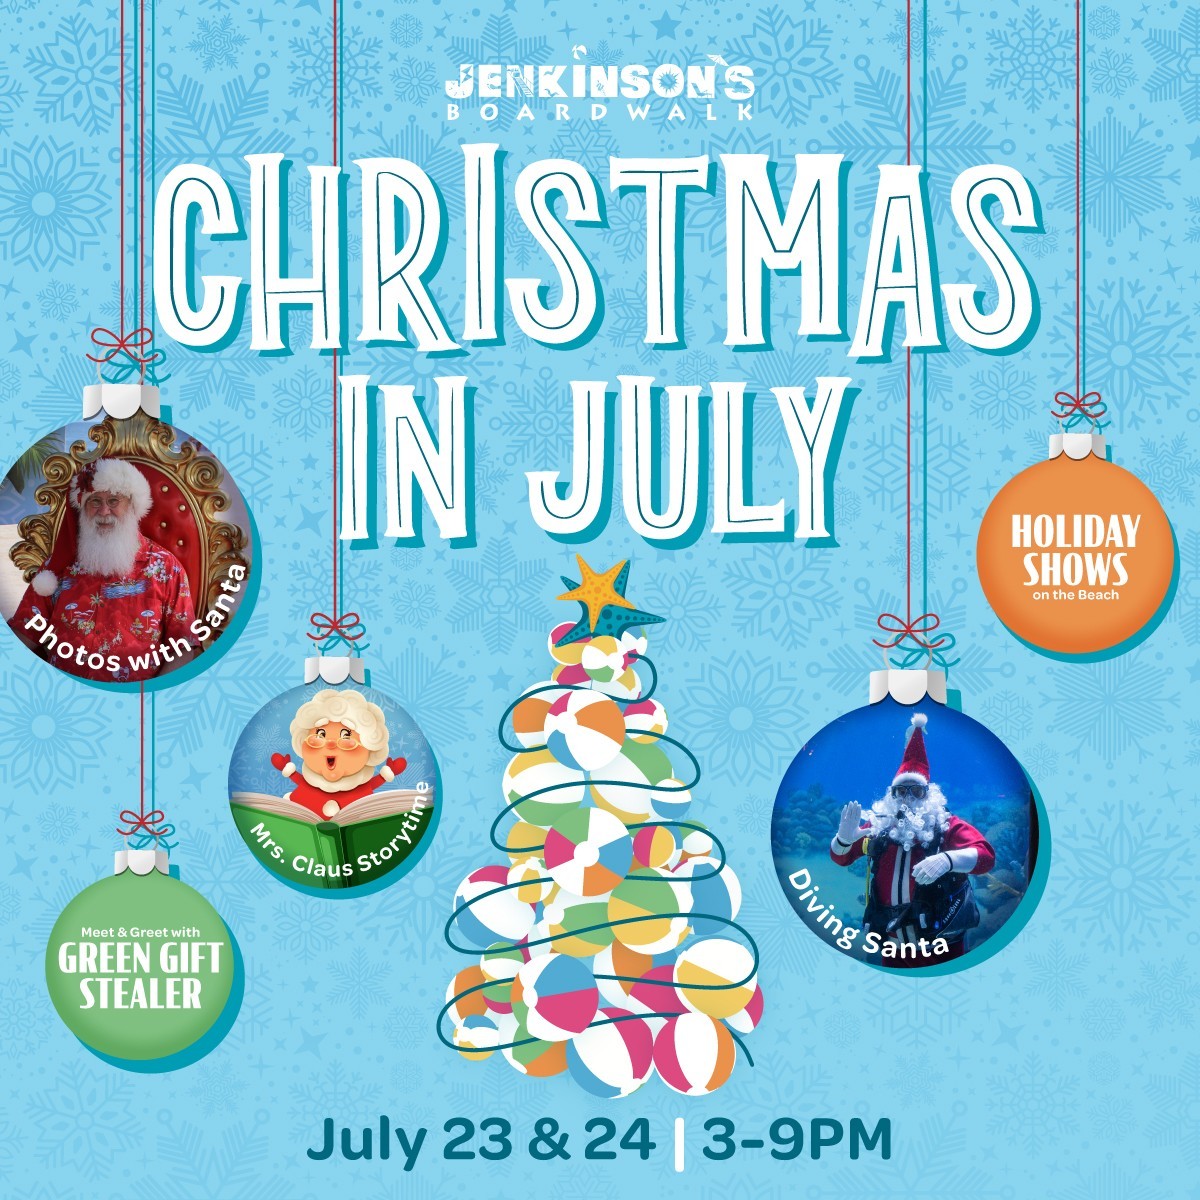 Christmas in july at jenkinsons boardwalk on july 23rd and 24 from 4-9pm